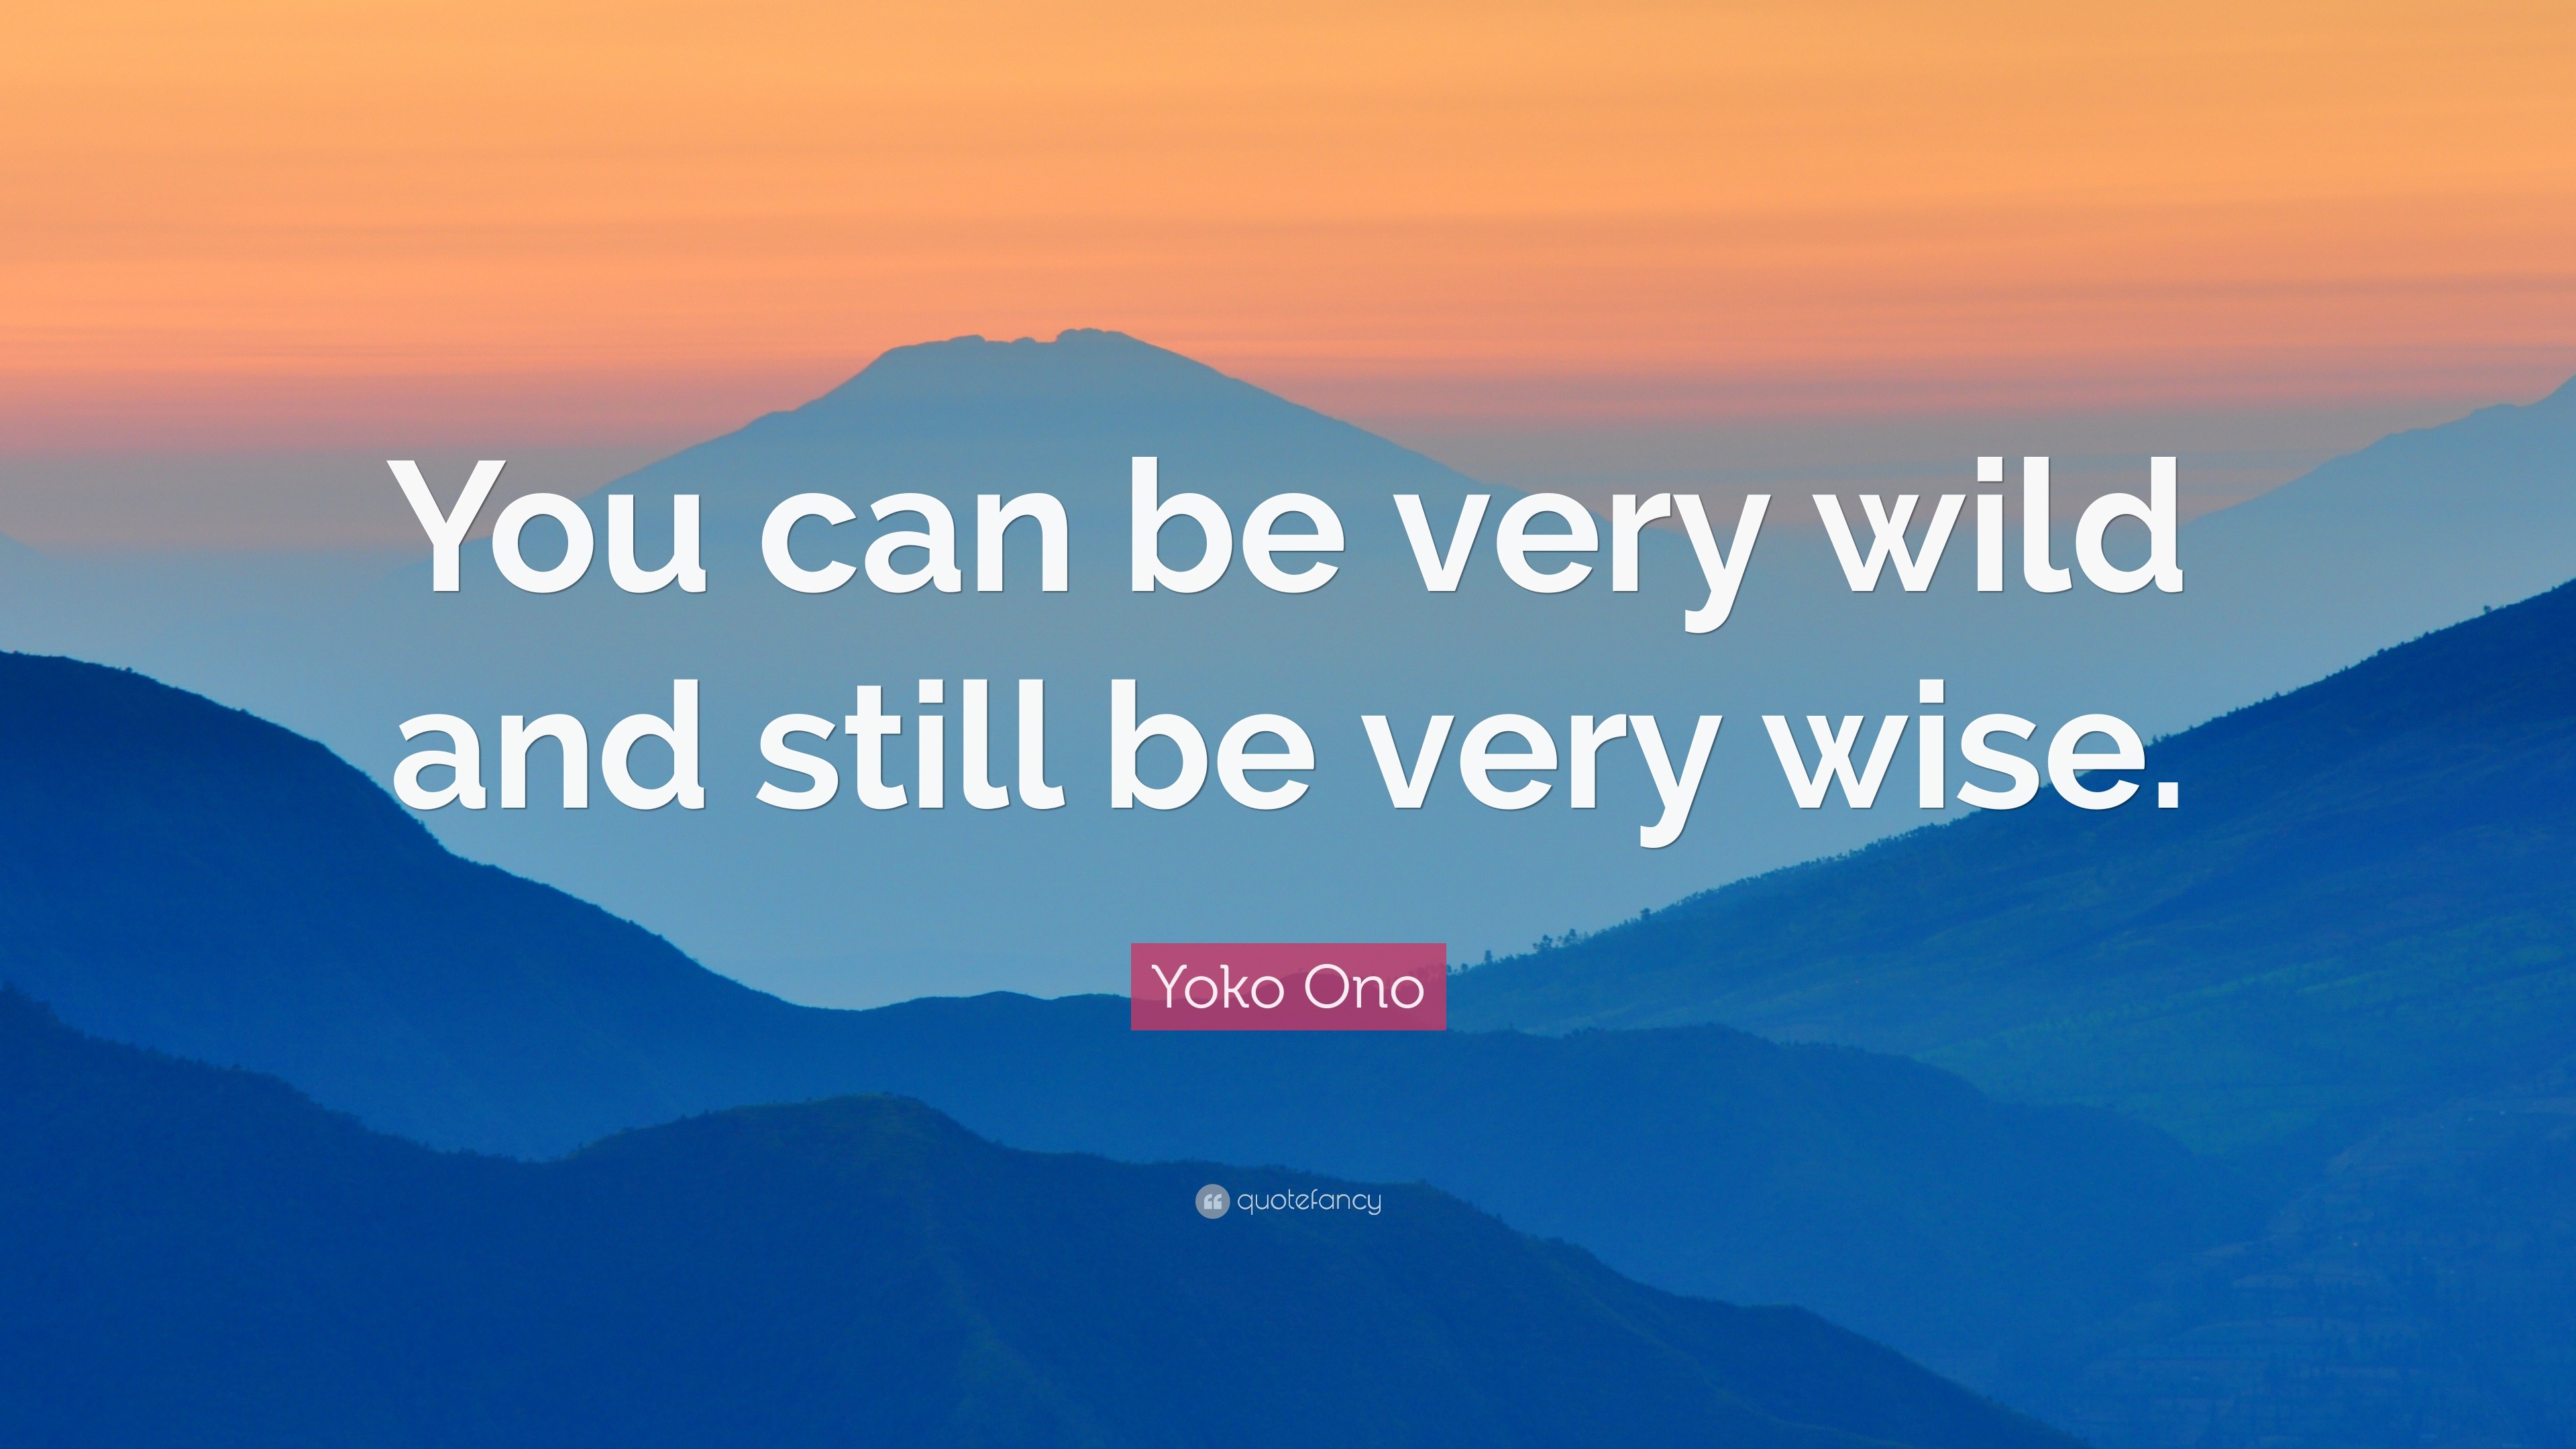 Yoko Ono Quote: "You can be very wild and still be very ...